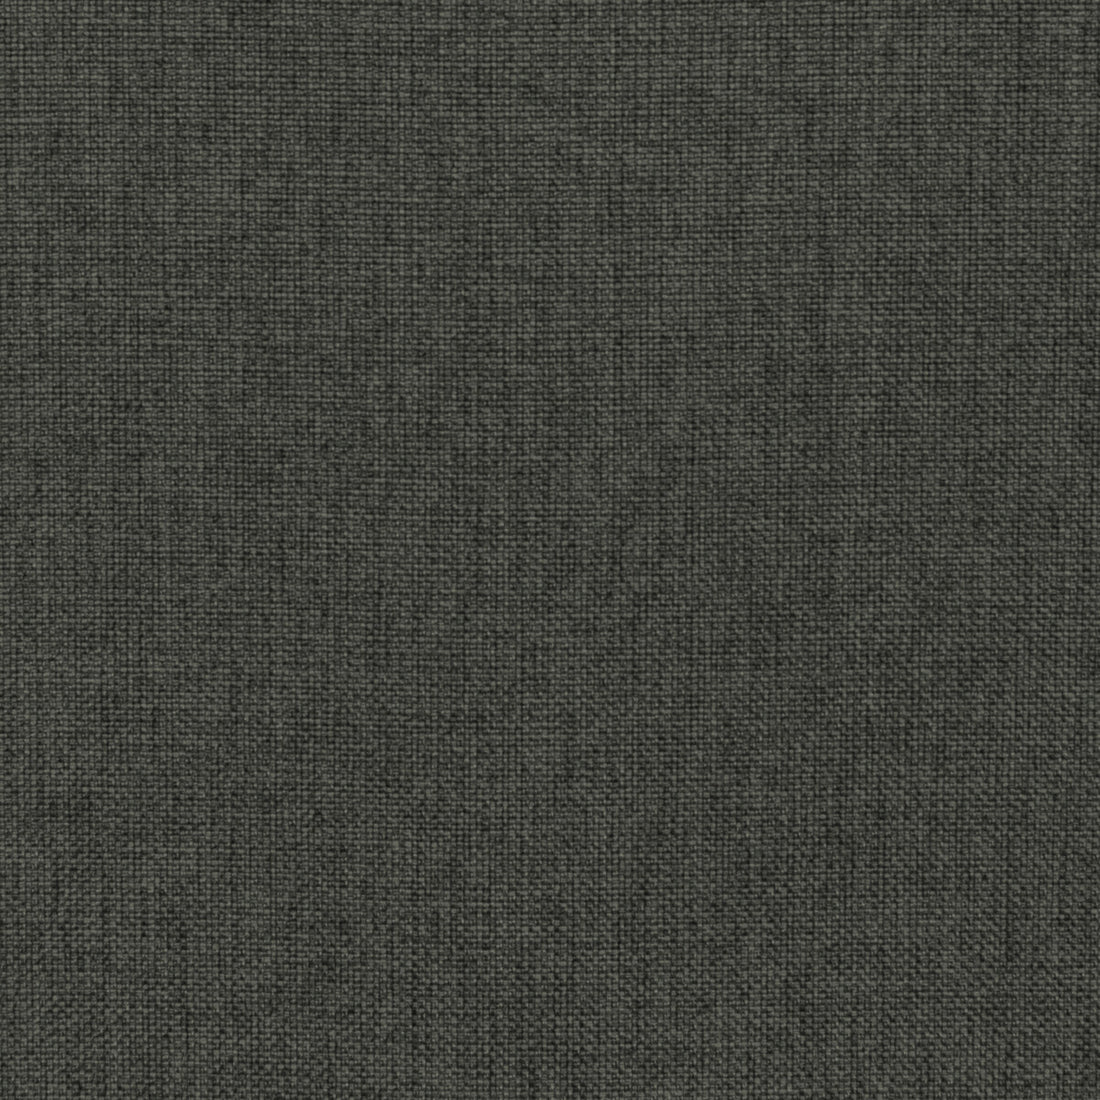 Fortify fabric in nickel color - pattern 36257.21.0 - by Kravet Contract in the Supreen collection